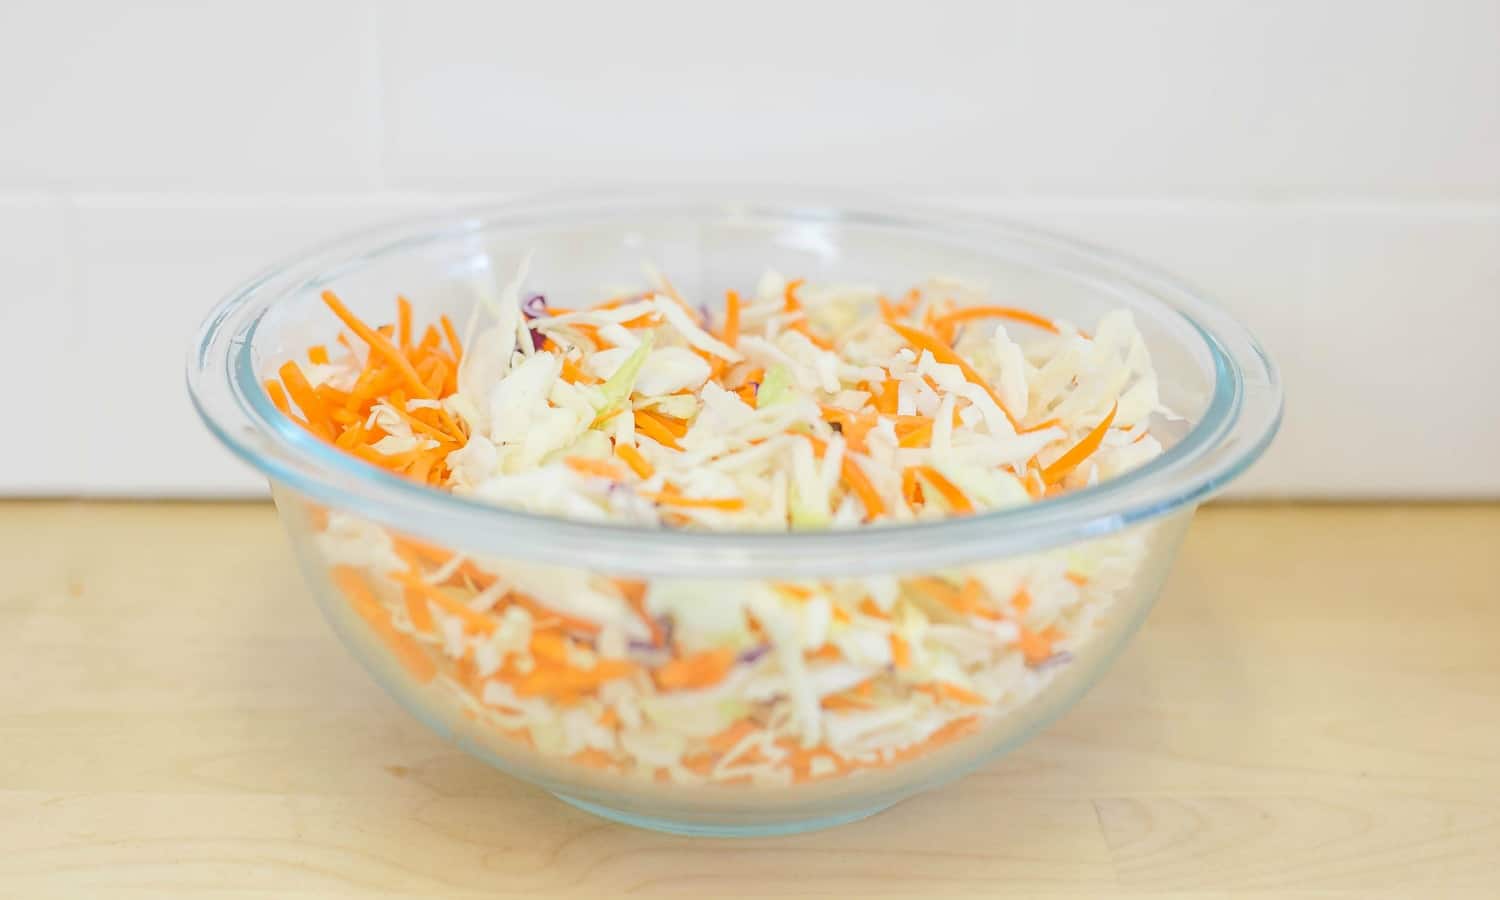 Mix shredded cabbage and carrots for the coleslaw topping